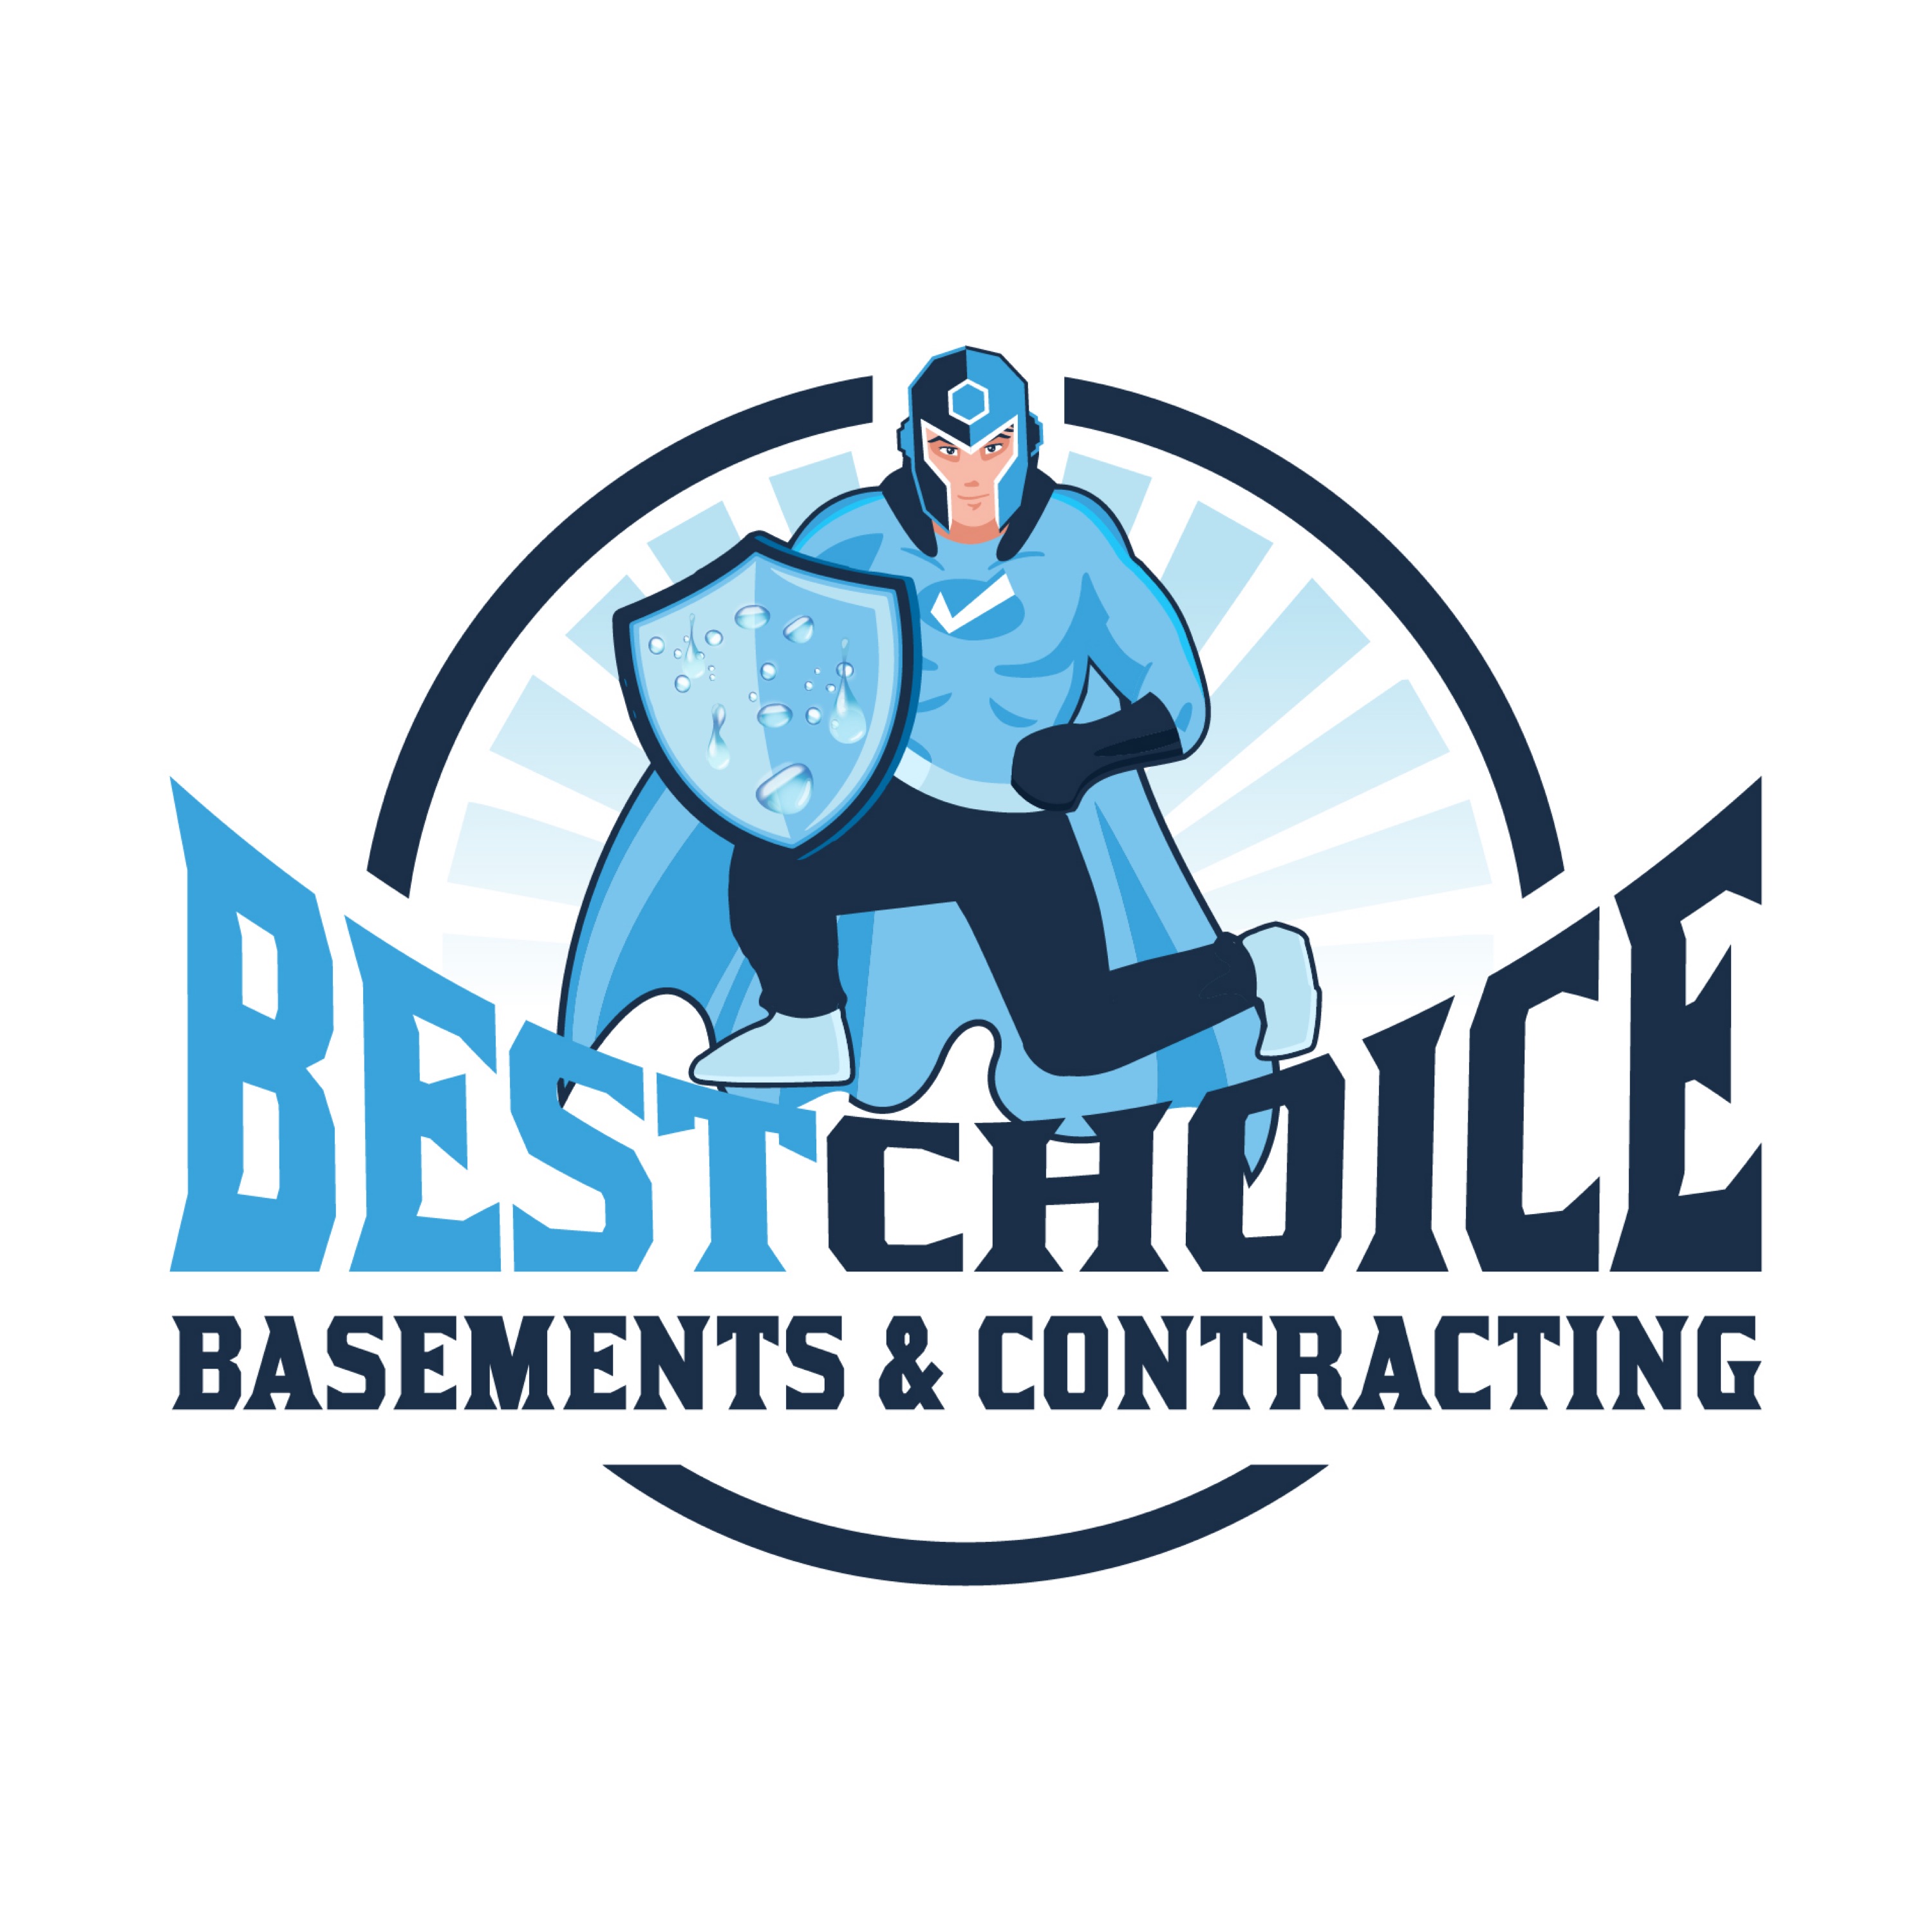 Best Choice Basements & Contracting Logo